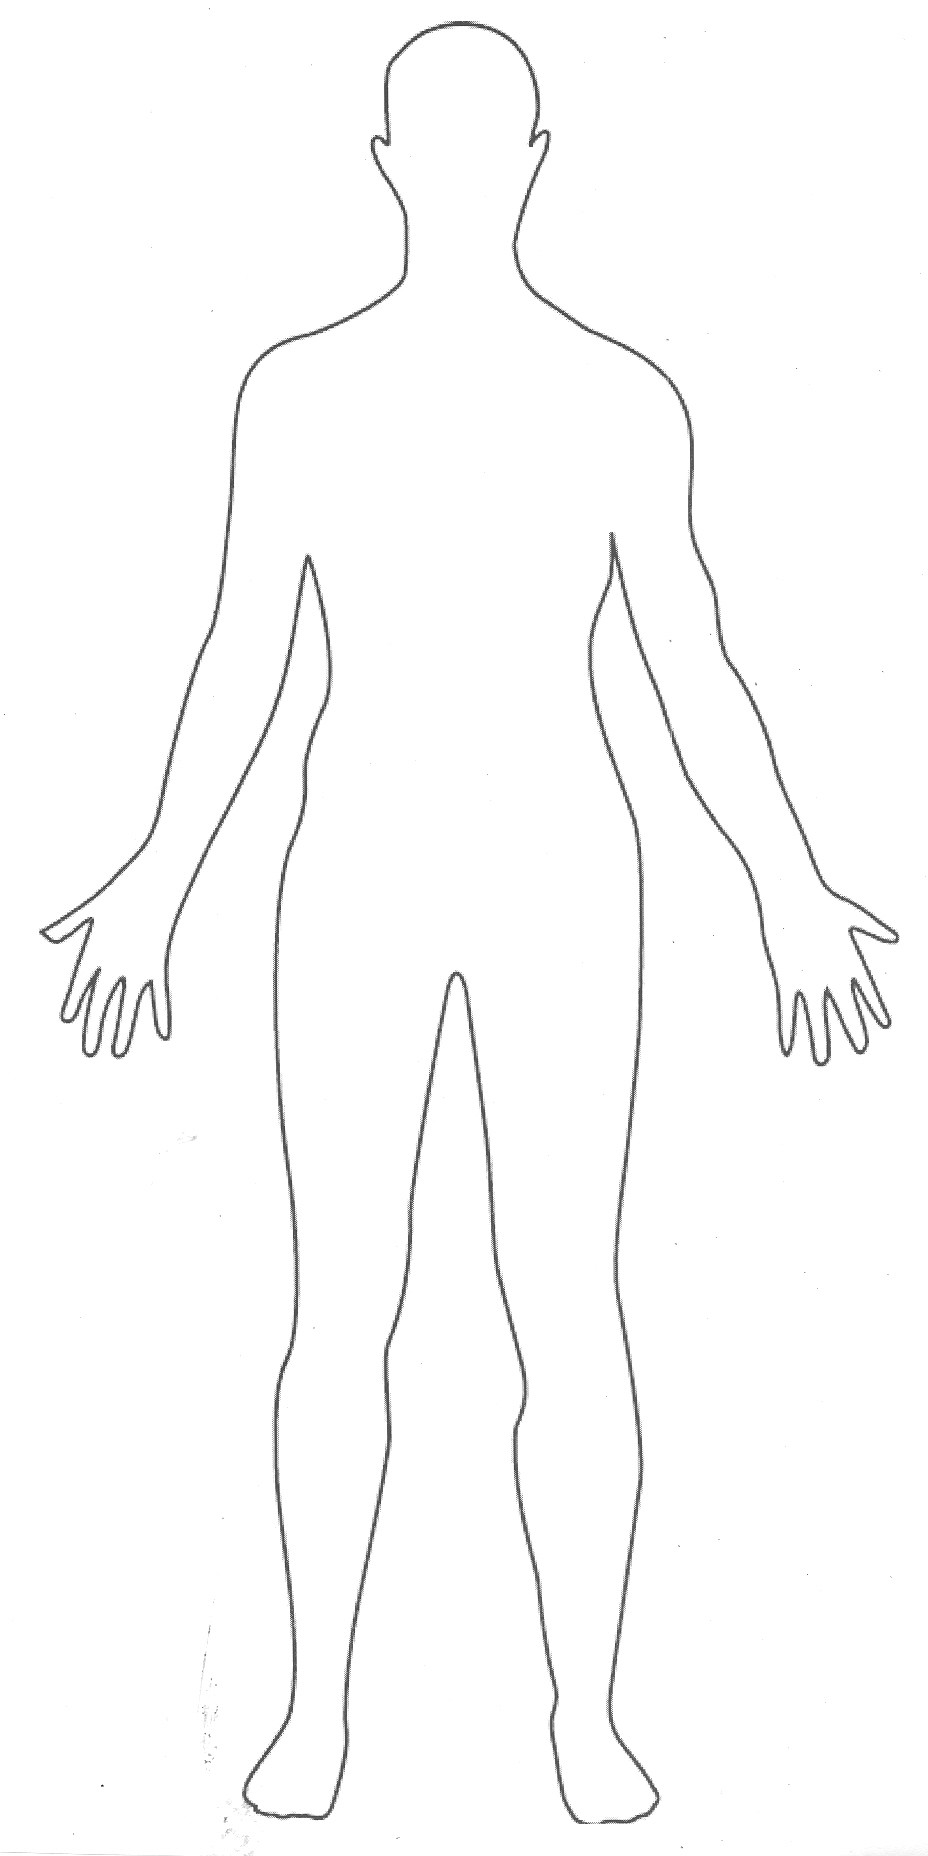 Outline of body